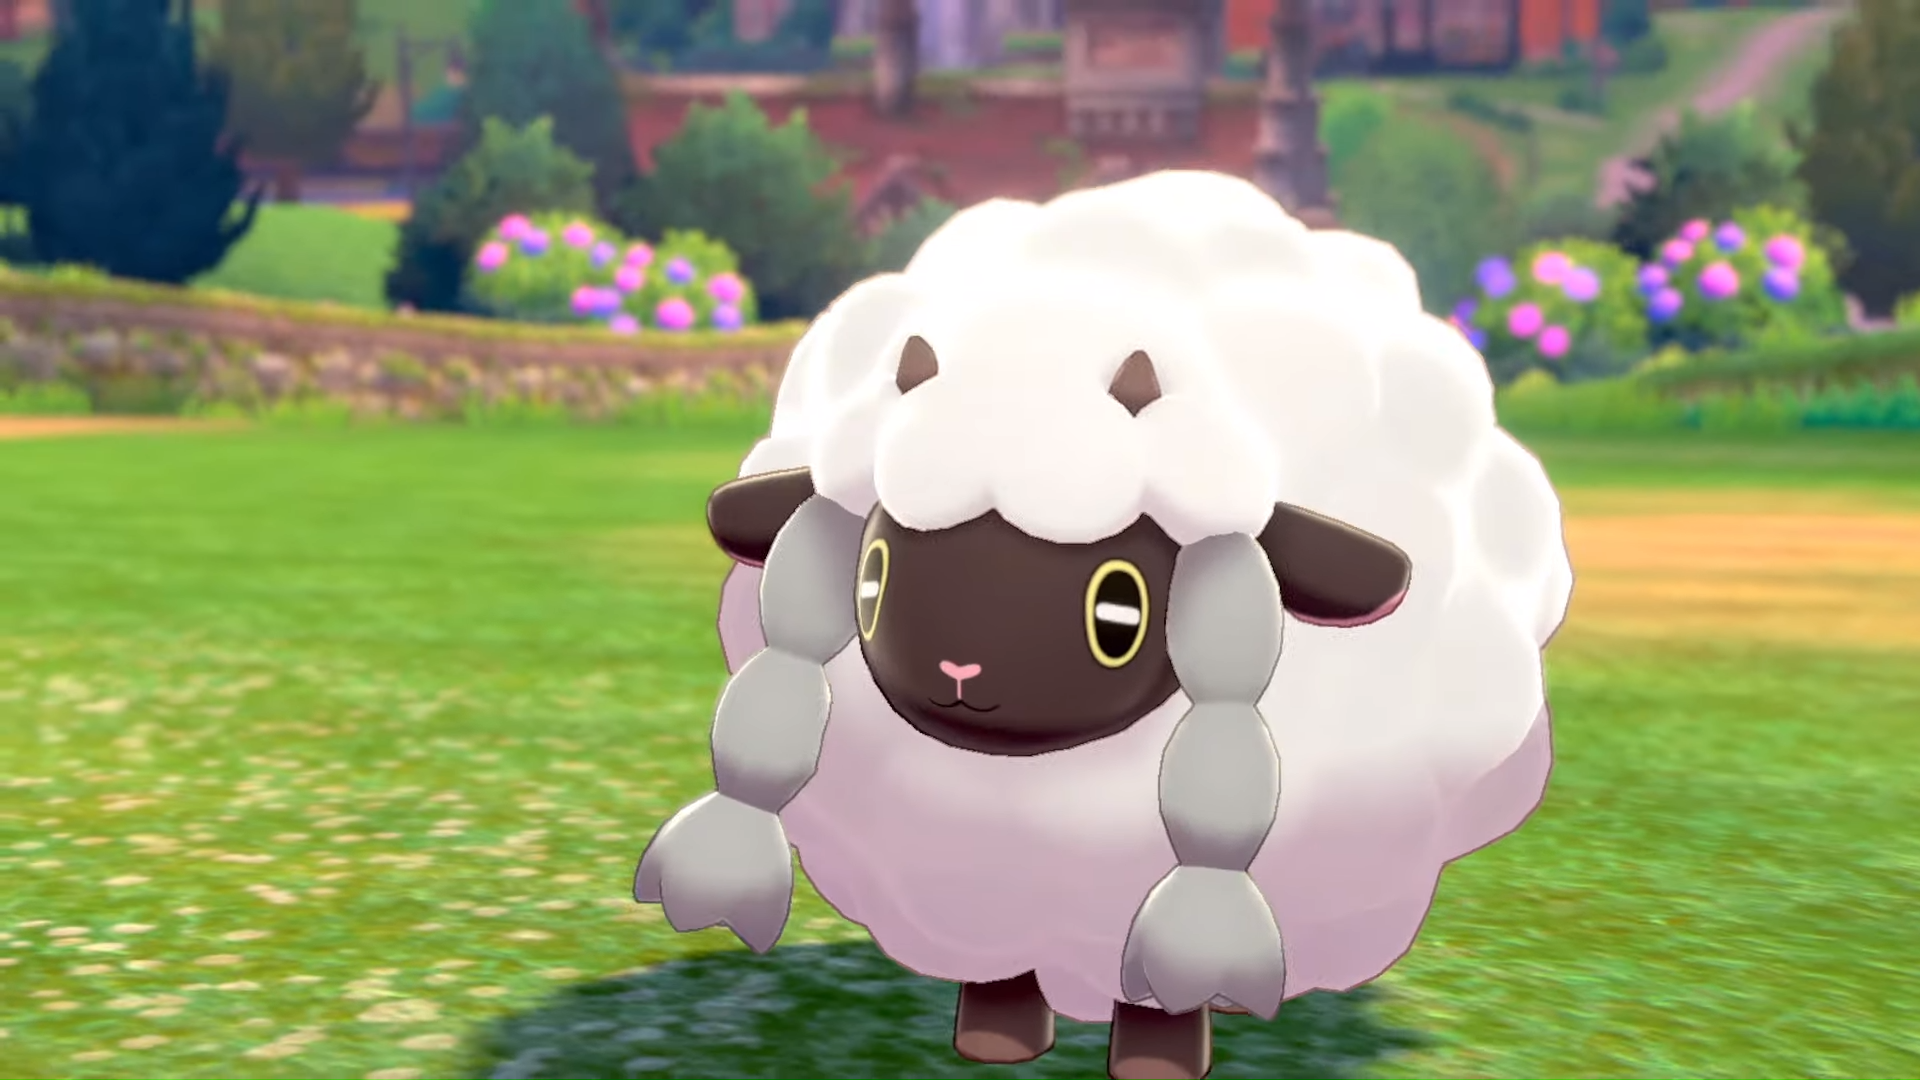 SavageWatermelon on X: Pokemon Sword and Shield Leak: Toxel's Evolution  Toxel -> (Name not revealed yet)  / X